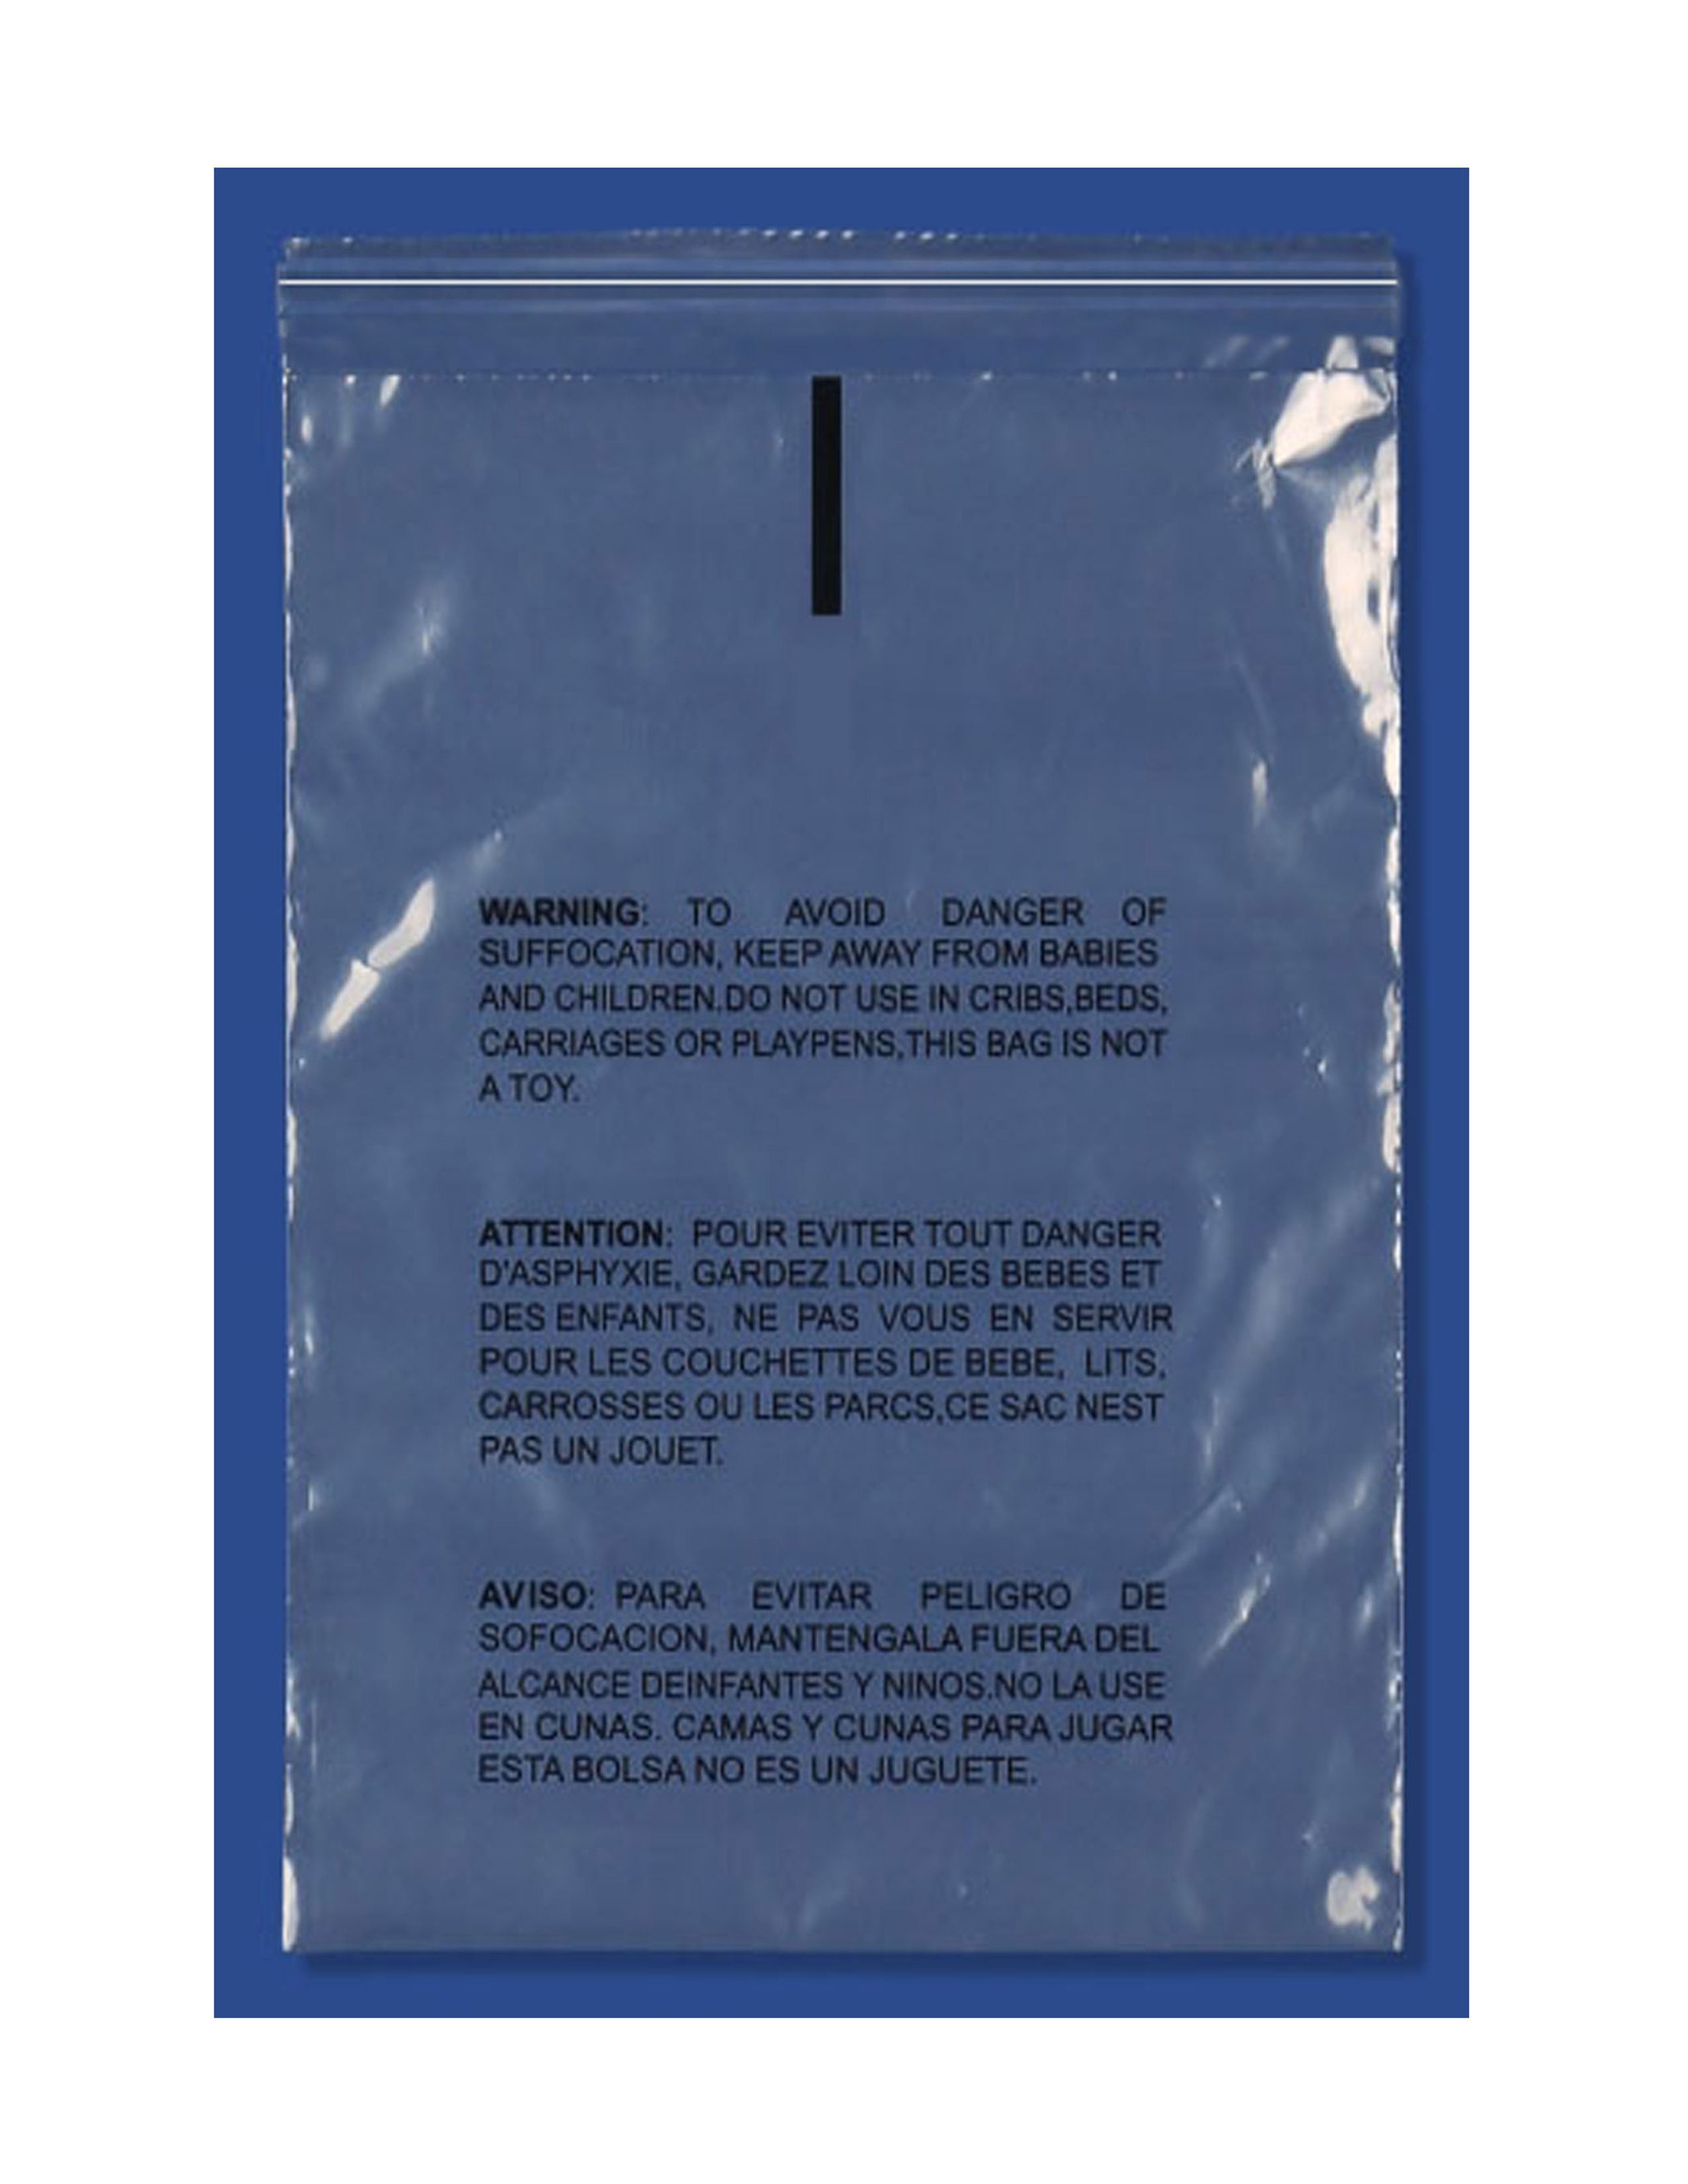 Big Clear Resealable Plastic Bags Self Adhesive Suffocation Warning 18"x24" 1000 